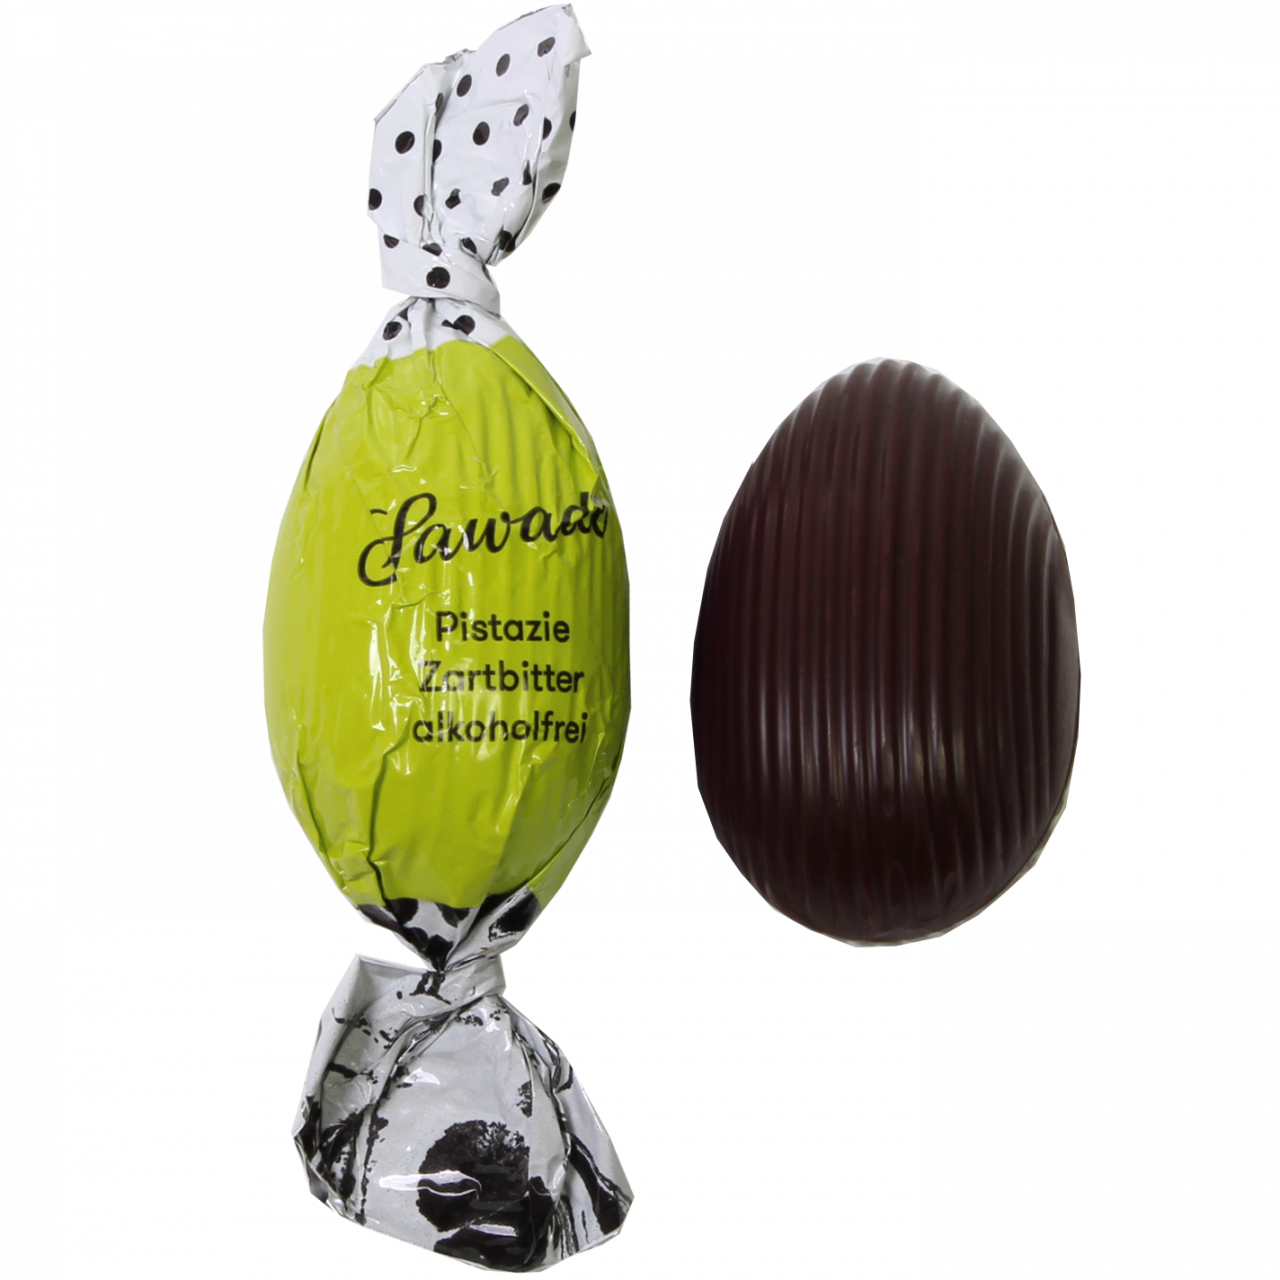 Dark chocolate pistachio easter egg - alcohol-free - Chocolate Easter Eggs, Sweet Fingerfood, Germany, german chocolate, chocolate with pistachio - Chocolats-De-Luxe